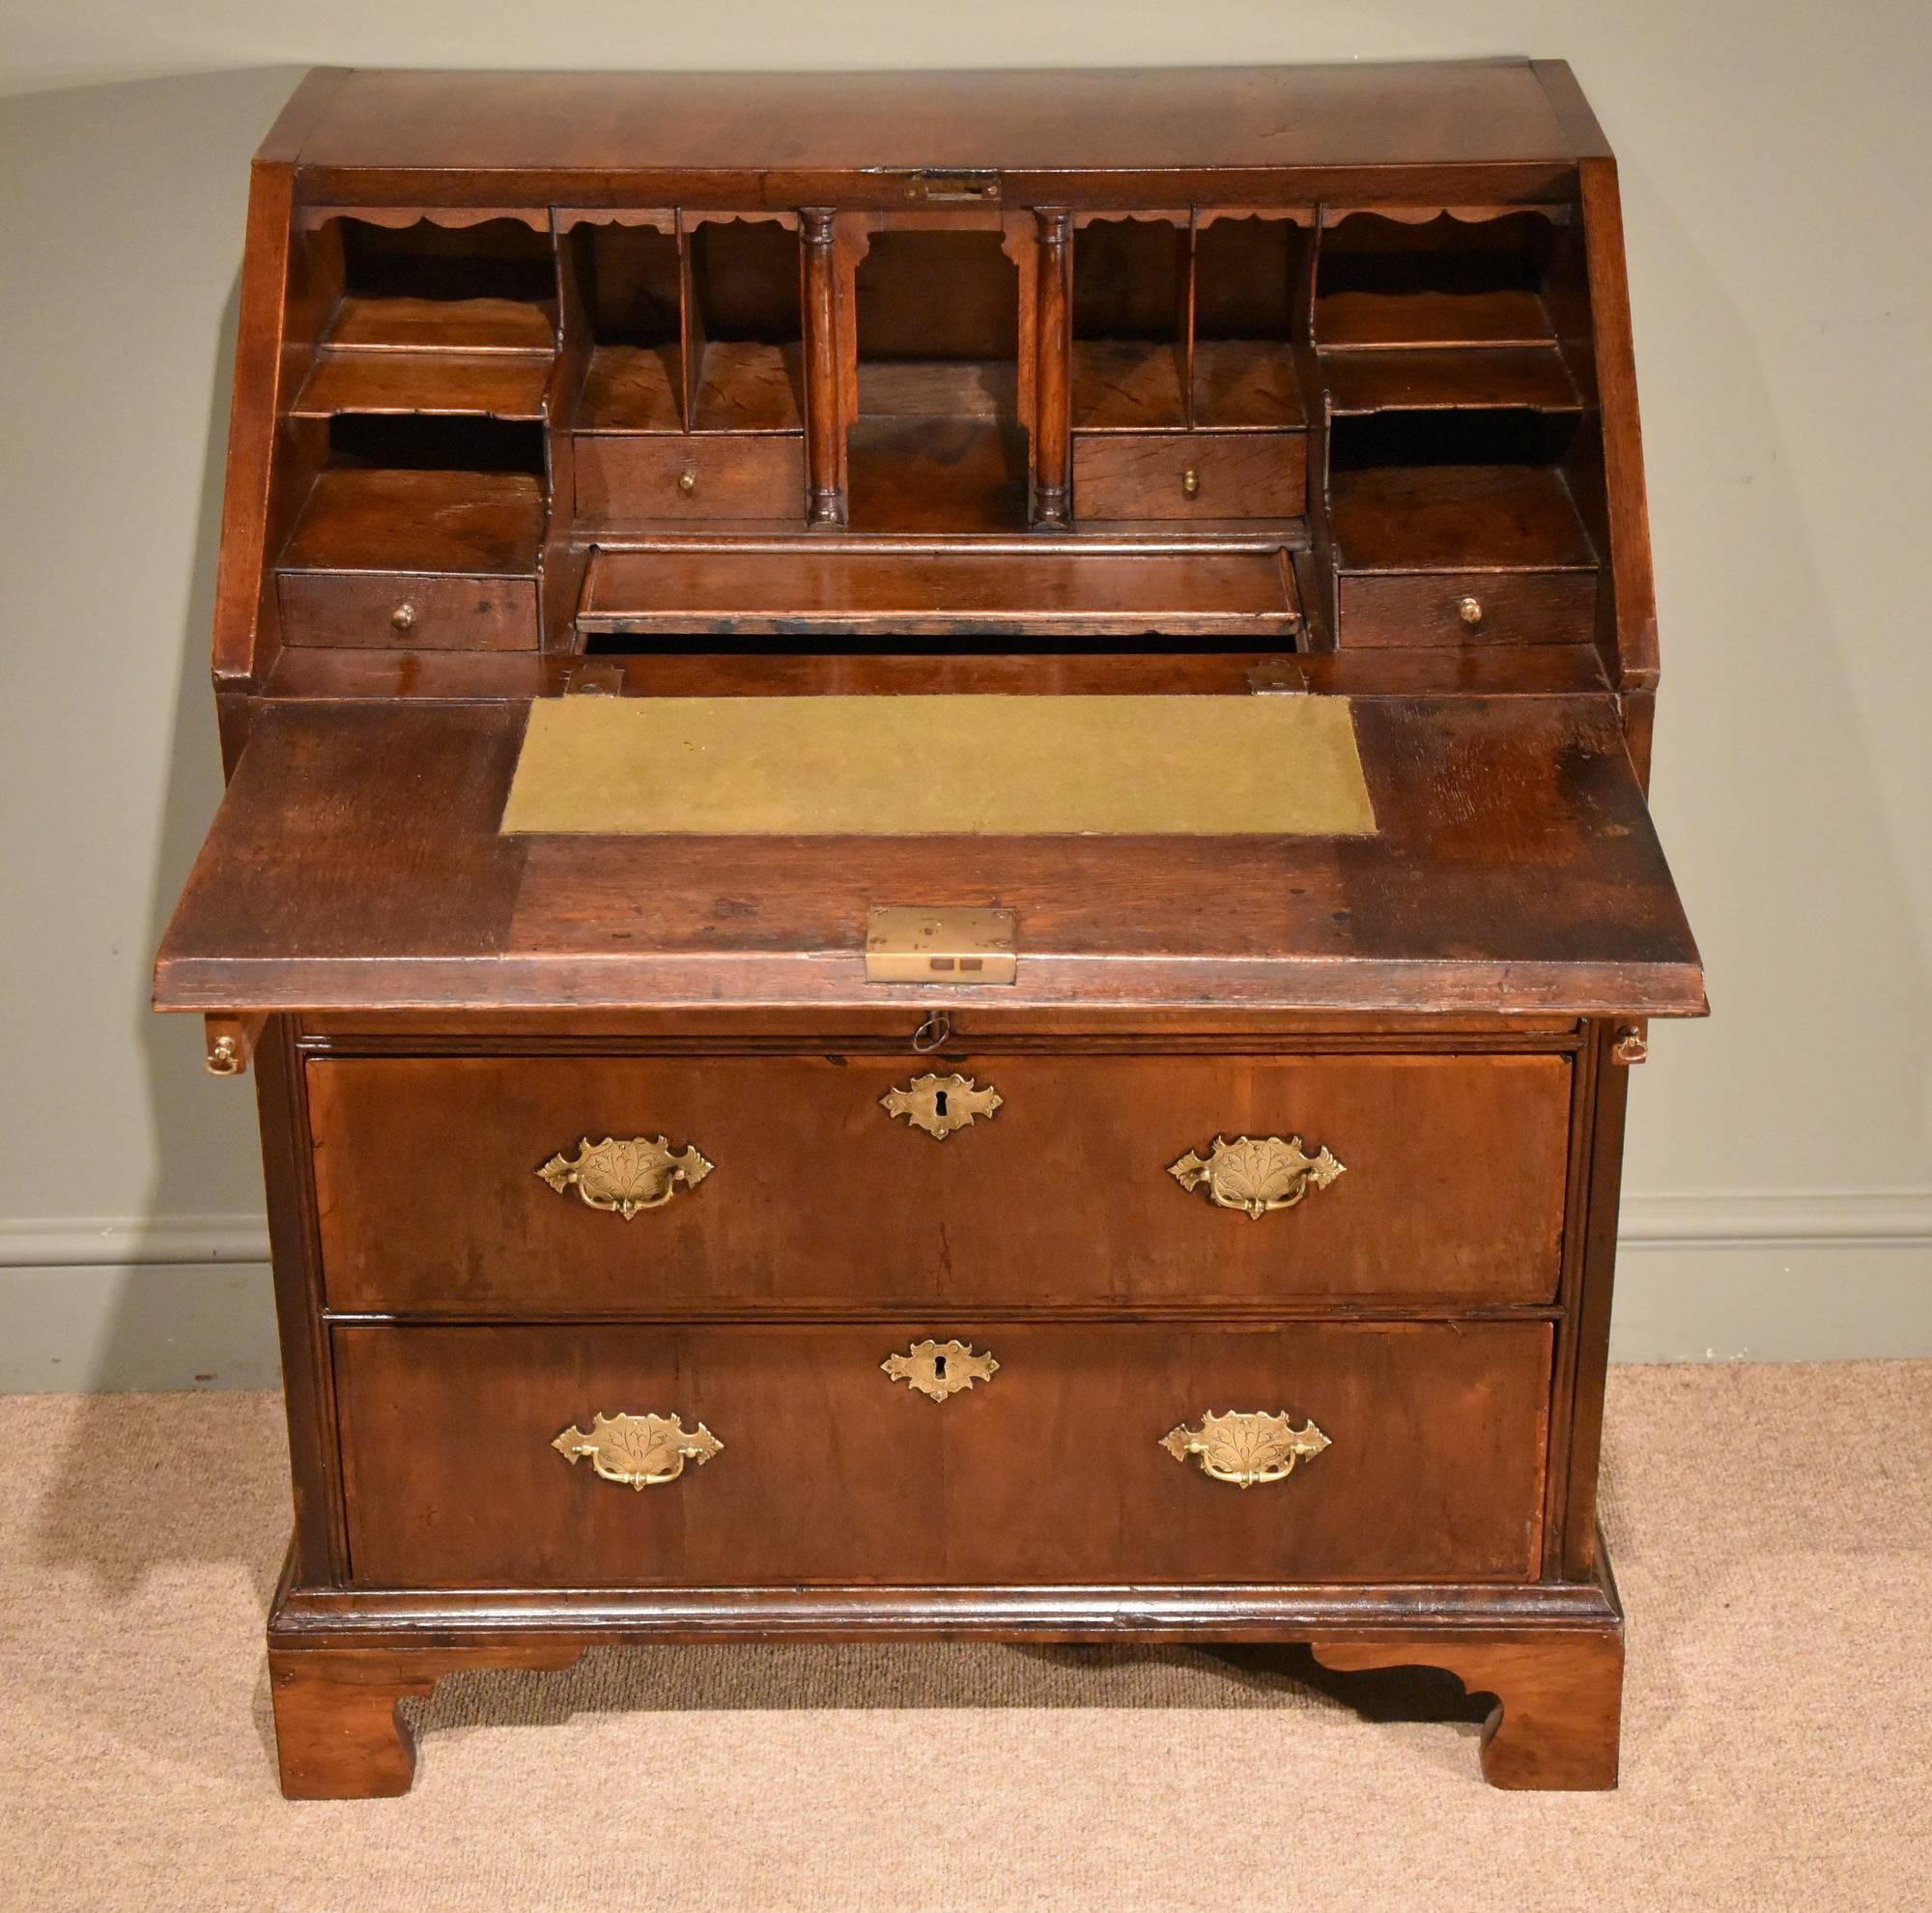 A handsome George II country walnut bureau of superb color

Dimensions:
Height 40.5